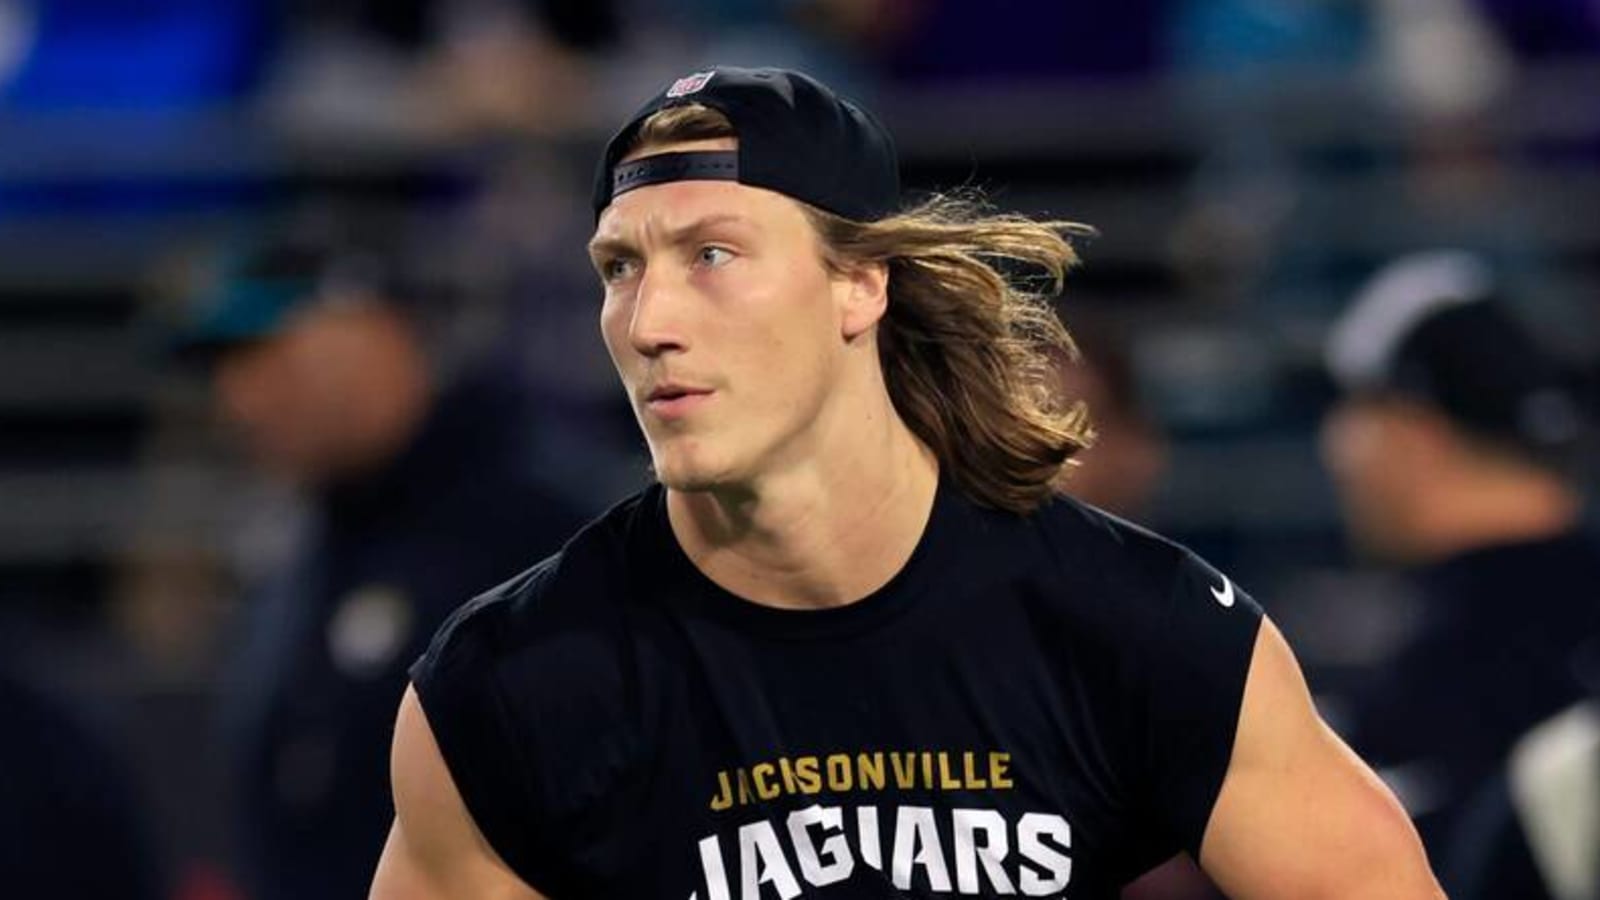 Watch: Trevor Lawrence completes longest TD pass of his career